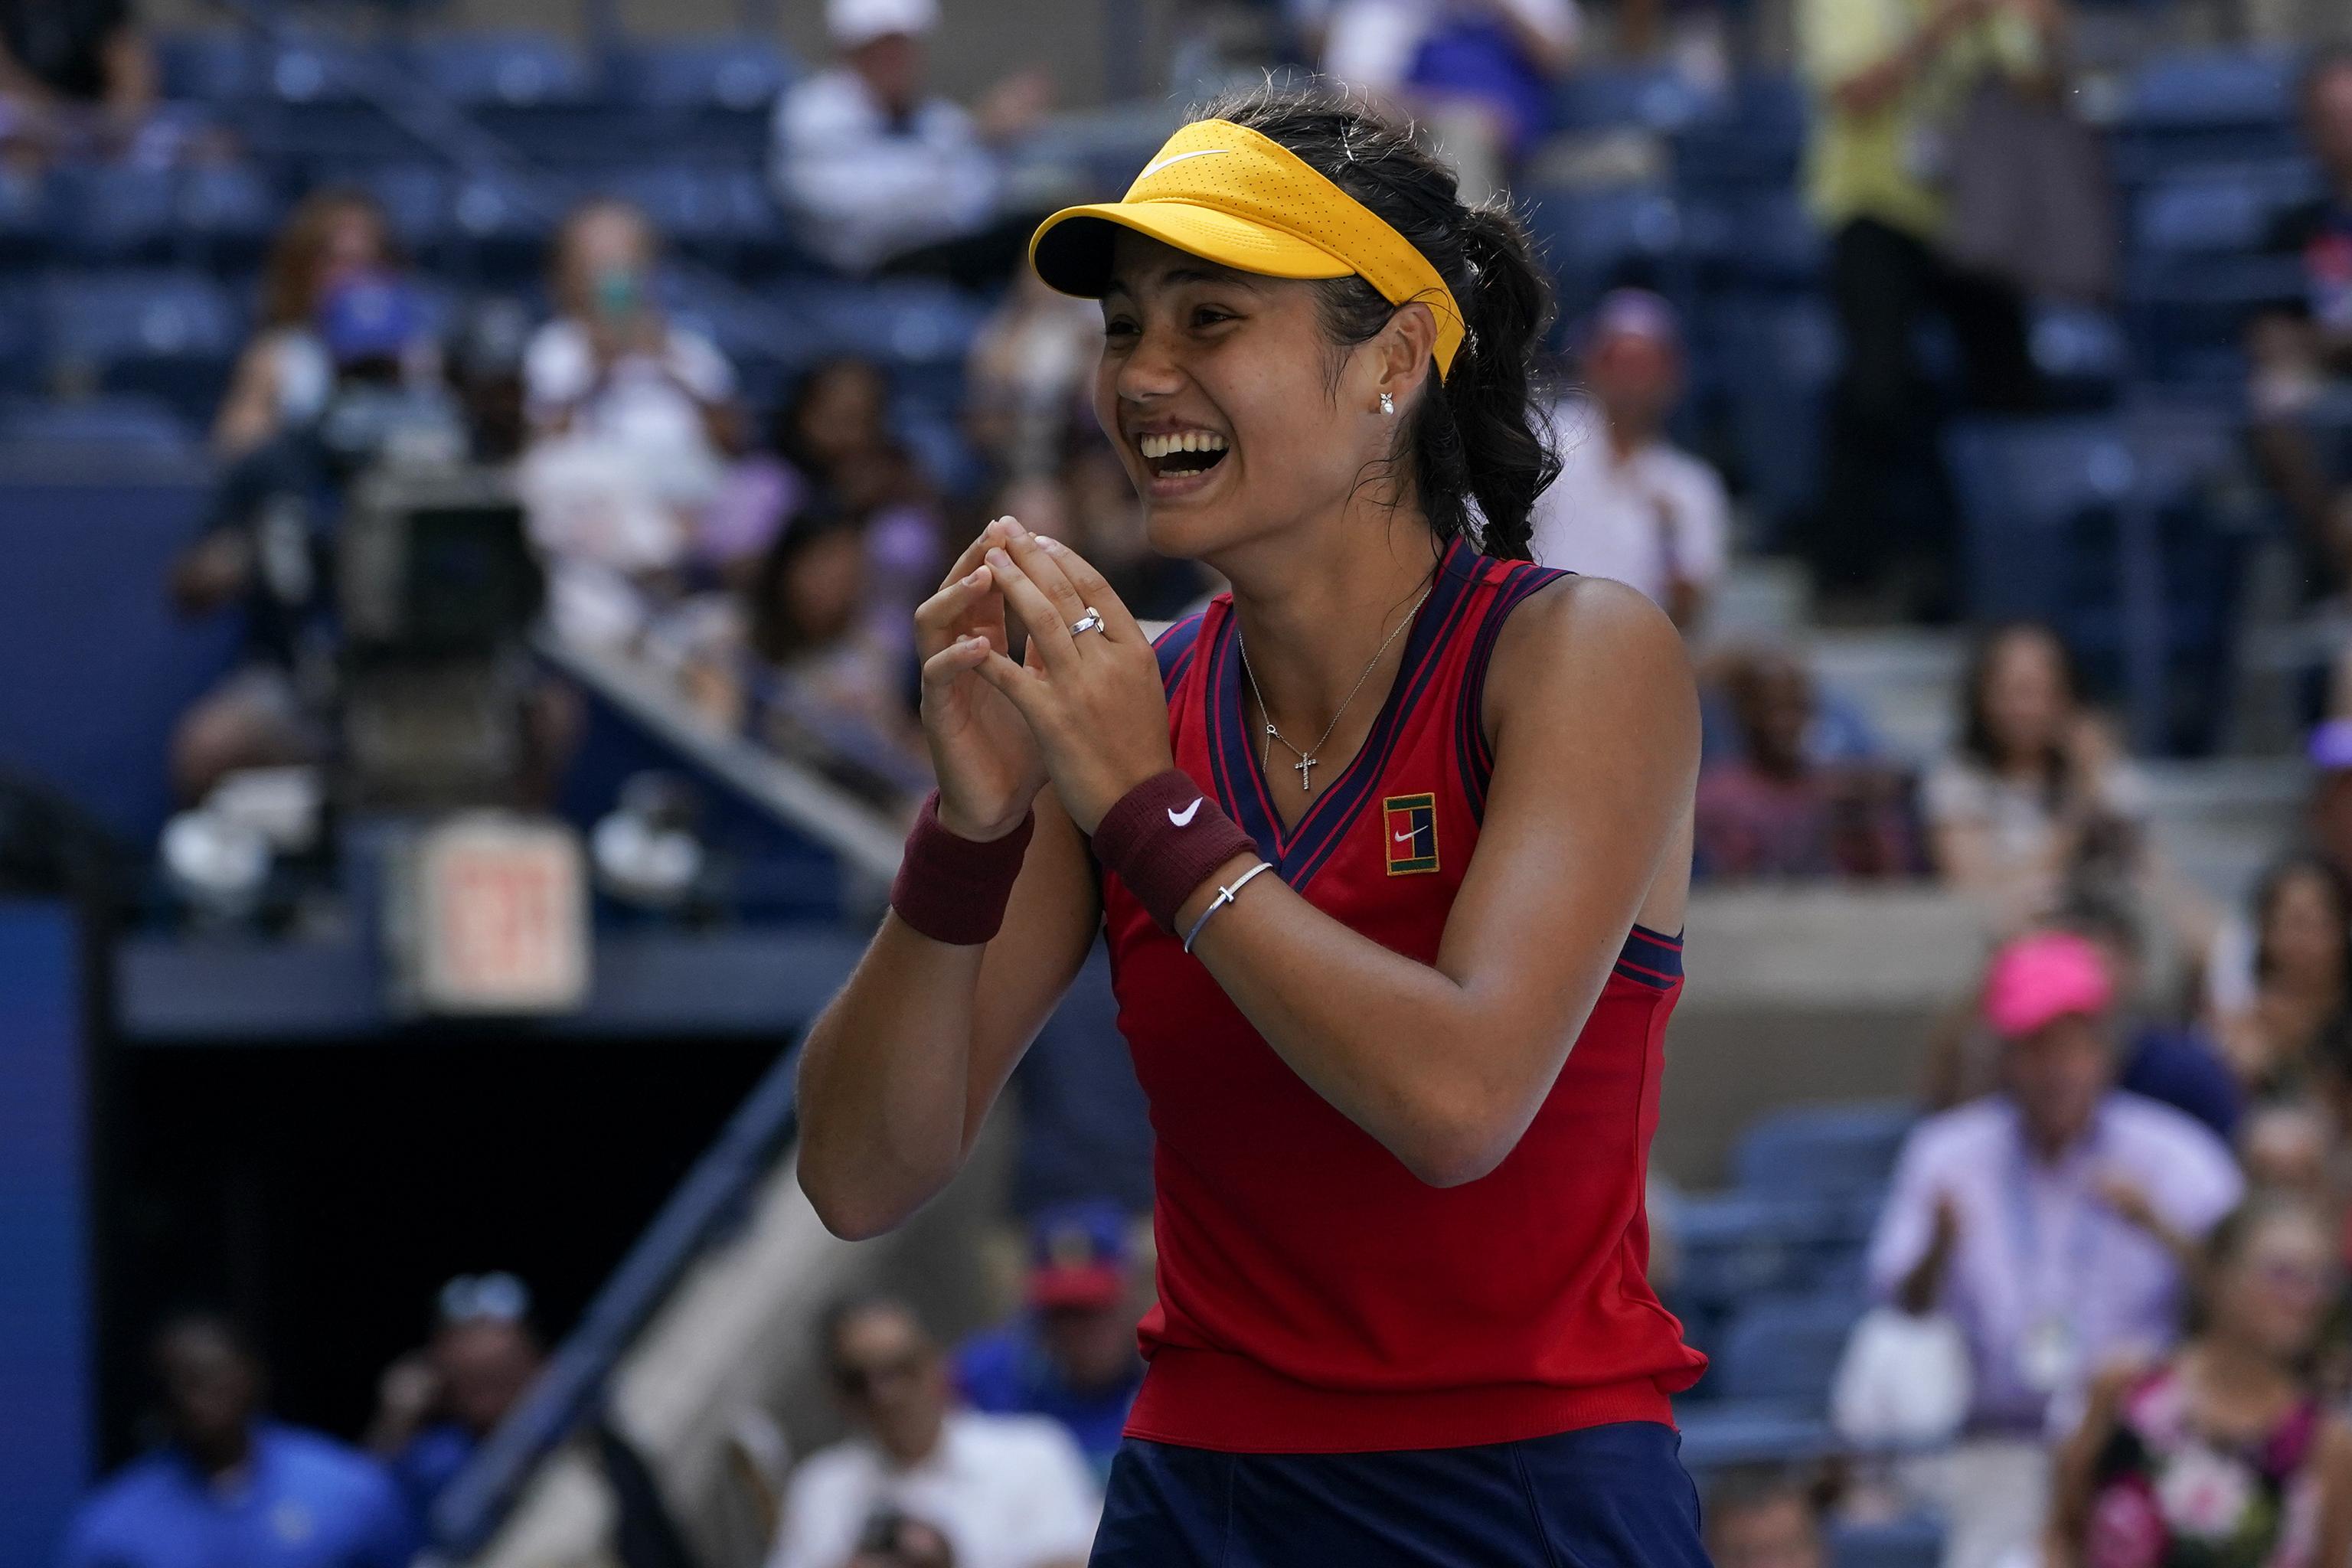 Mus Voorbereiding Marty Fielding US Open Tennis 2021 Results: Scores, Highlights from Early Wednesday Results  | Bleacher Report | Latest News, Videos and Highlights